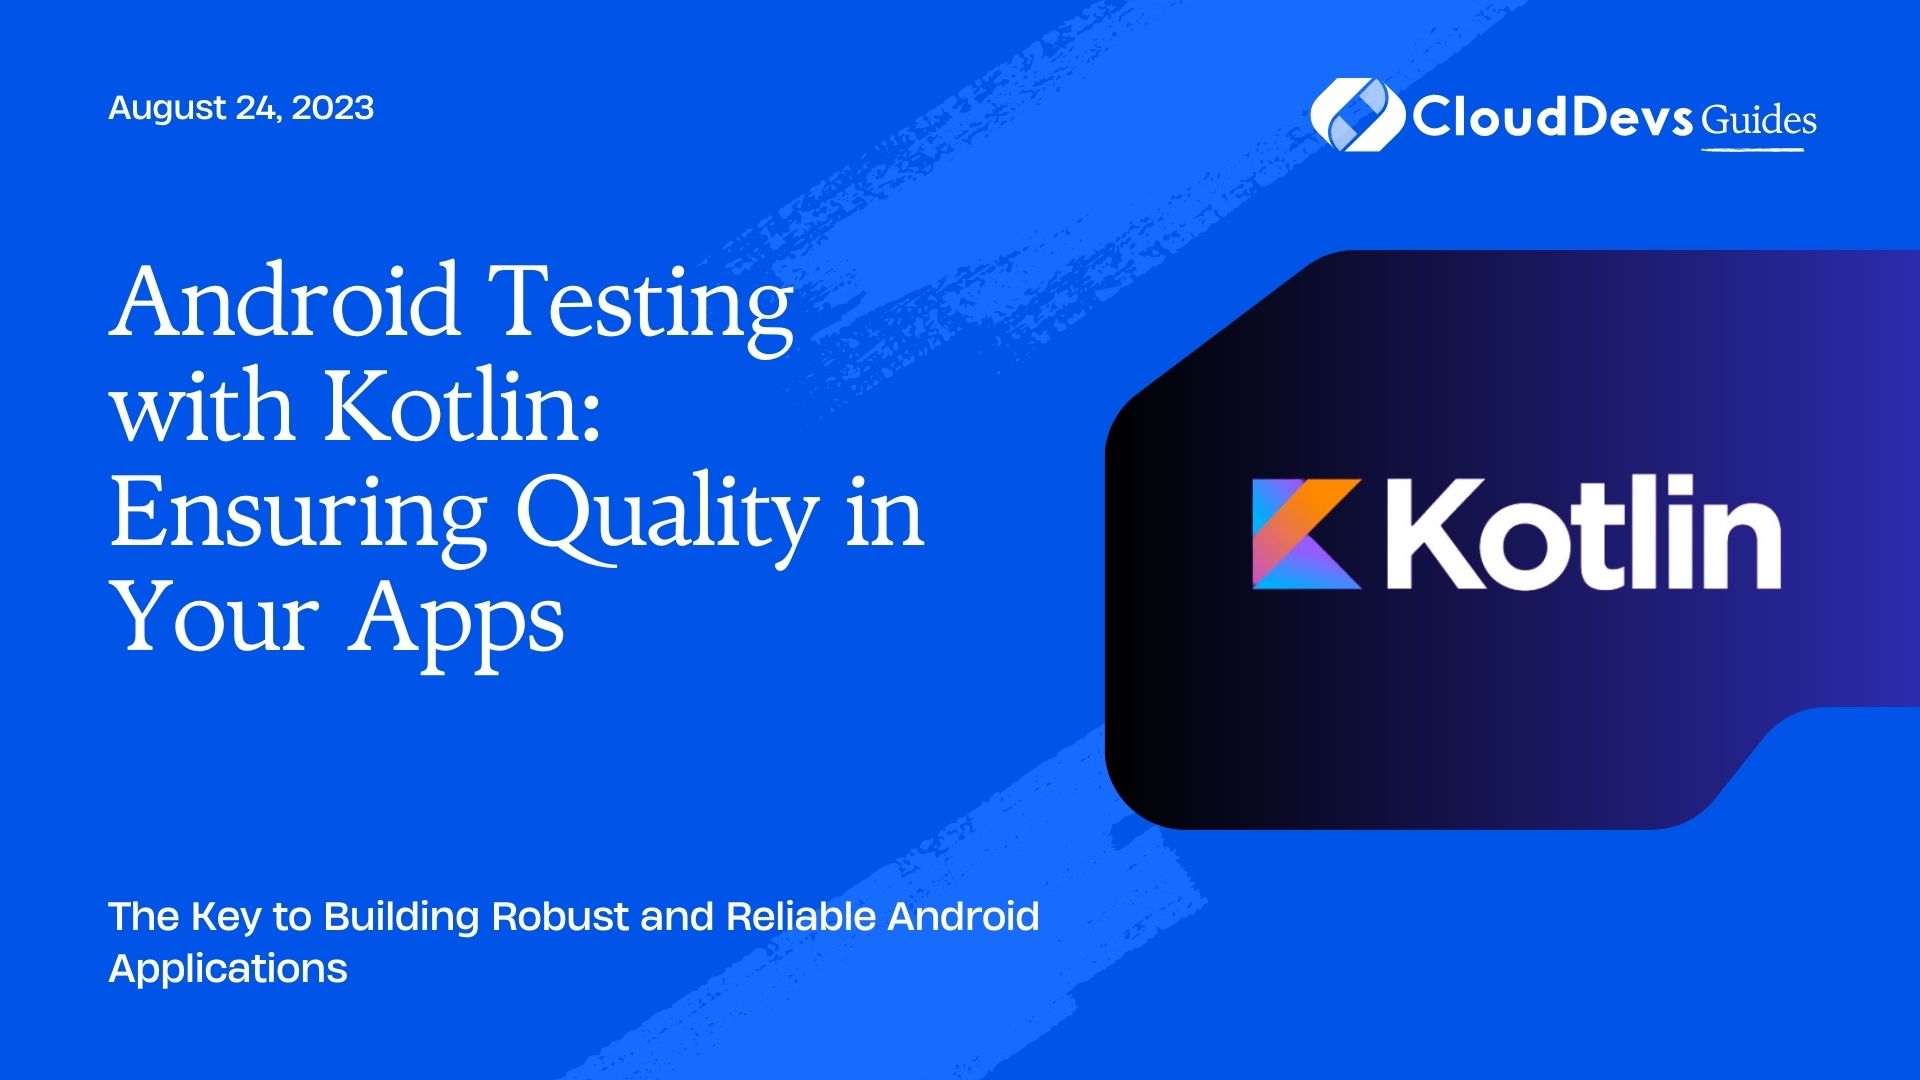 Android Testing with Kotlin: Ensuring Quality in Your Apps